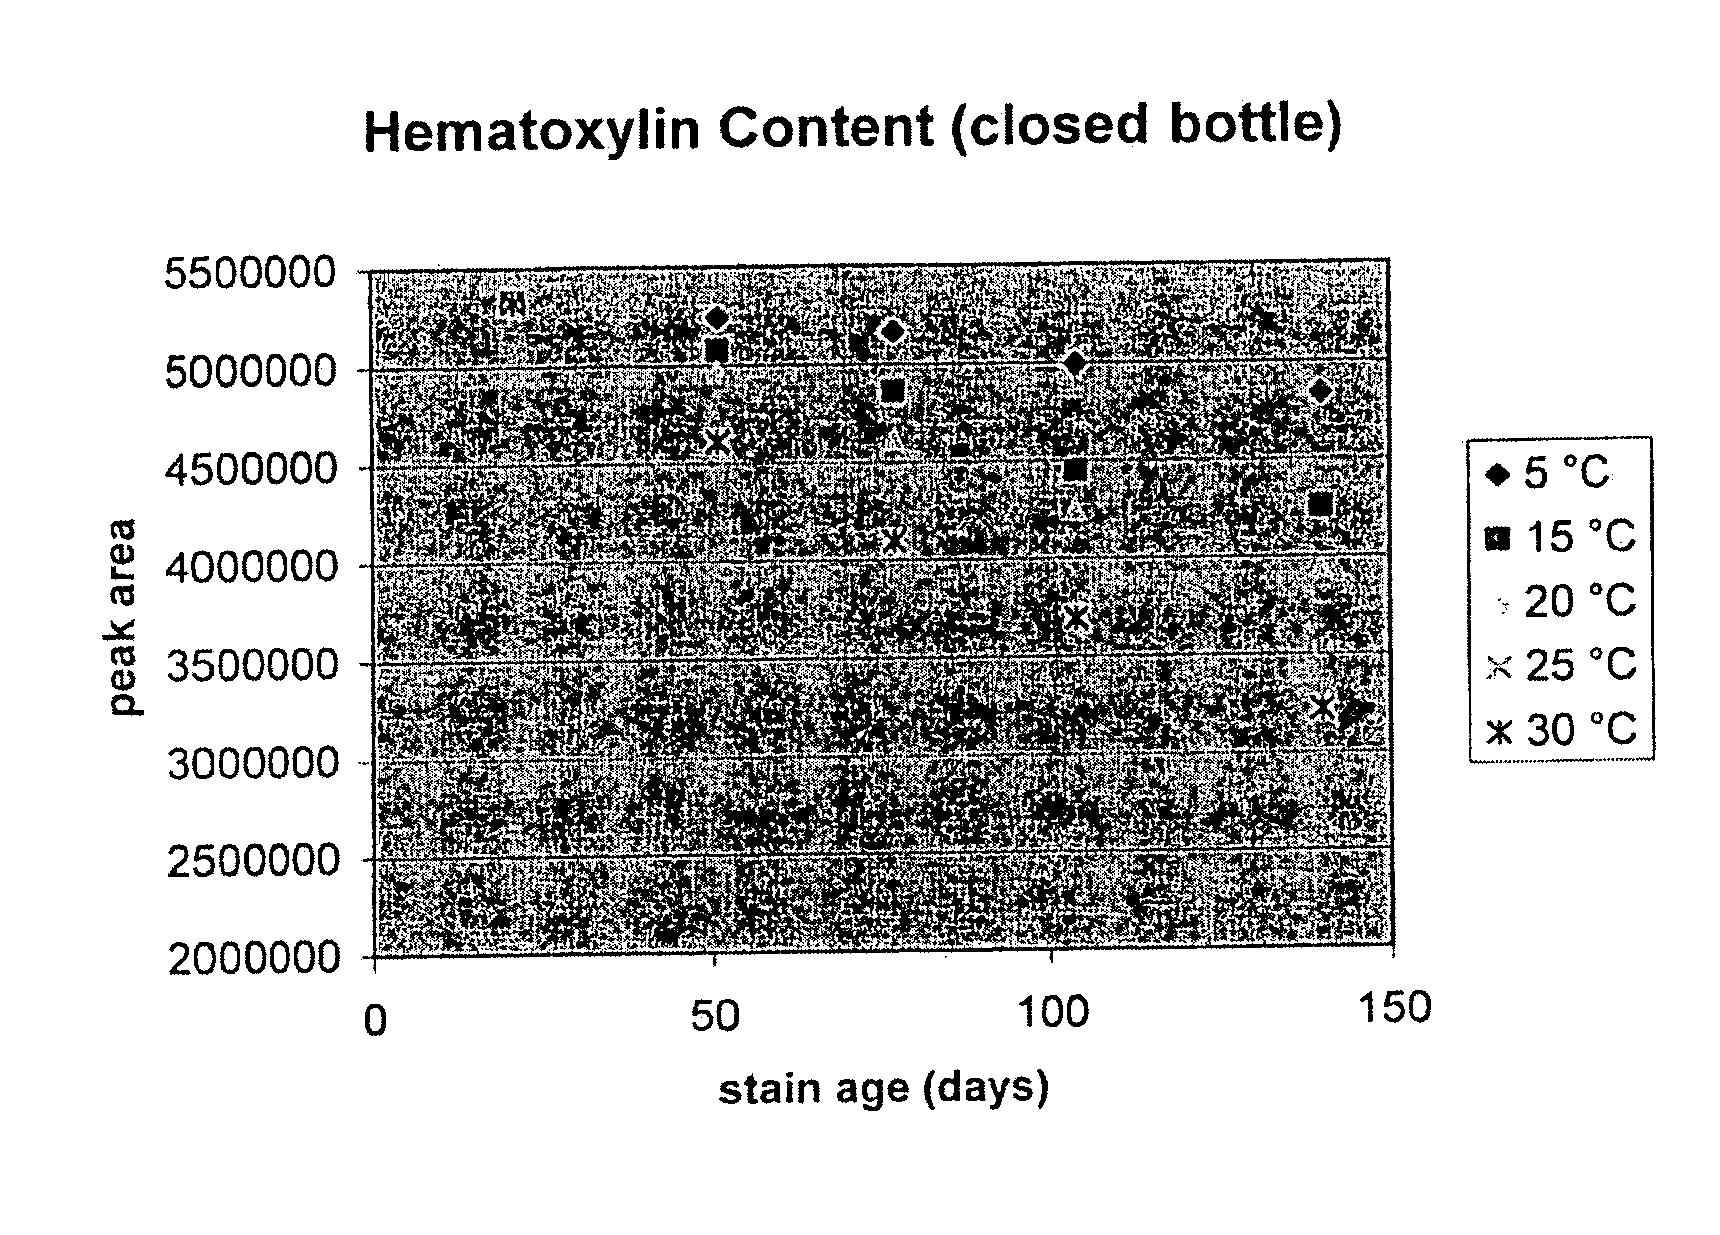 Method for improving the shelf-life of hematoxylin staining solutions